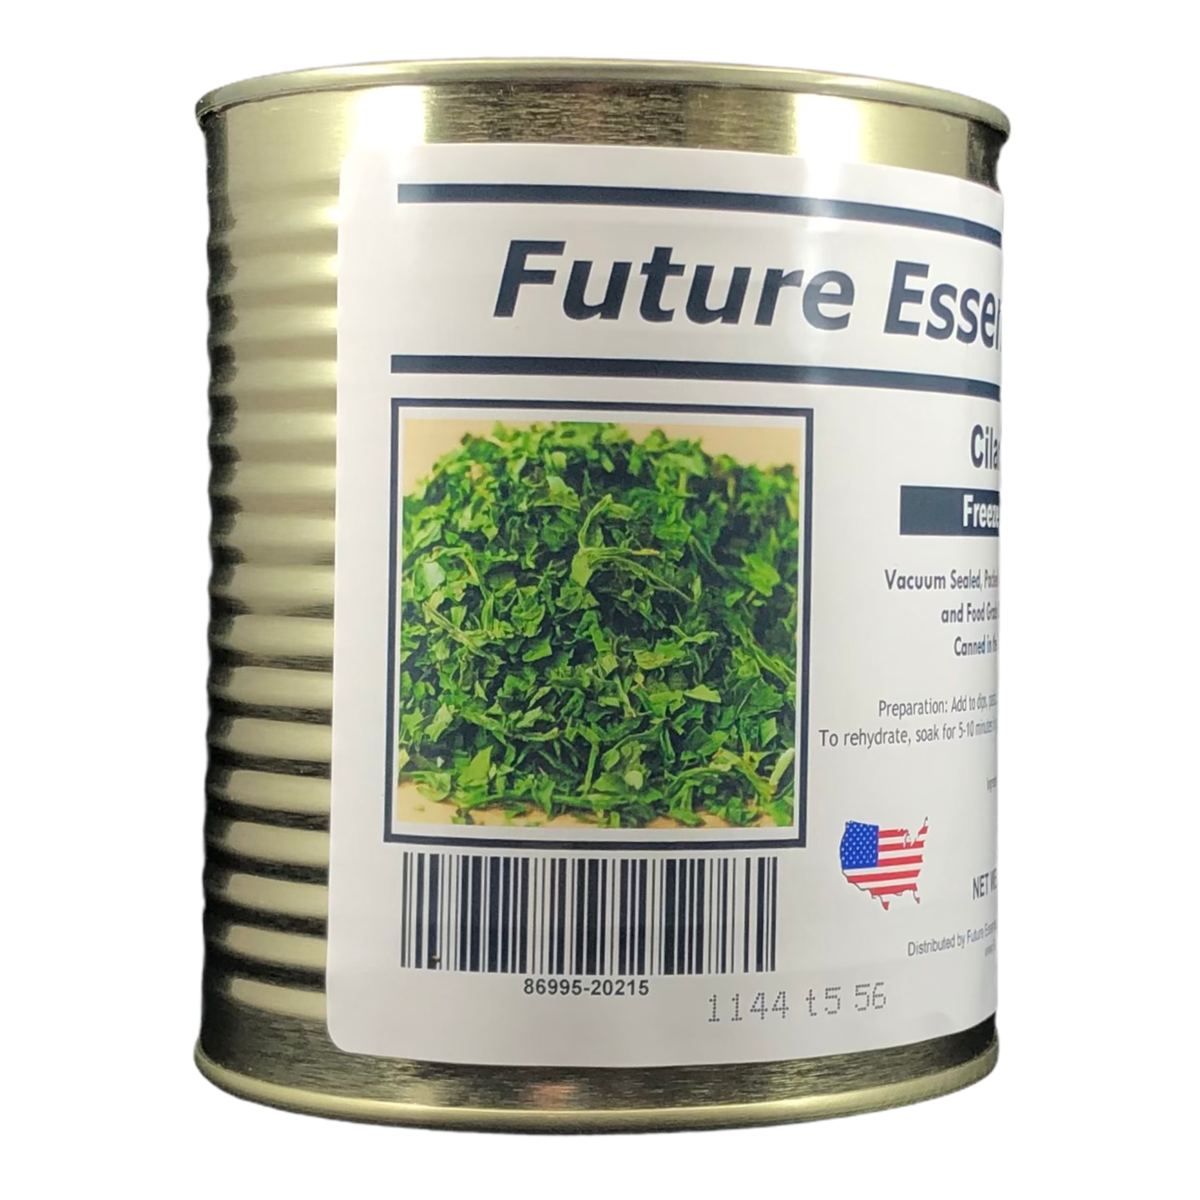 1 Case of 12 Cans - Future Essentials Freeze Dried Cilantro #2.5 Can / 3 oz is the perfect way to add the fresh taste of cilantro to your meals, without the hassle of buying and storing fresh cilantro. Our freeze dried cilantro is made from 100% fresh cilantro, which is carefully freeze dried to preserve its flavor, nutrients, and color.